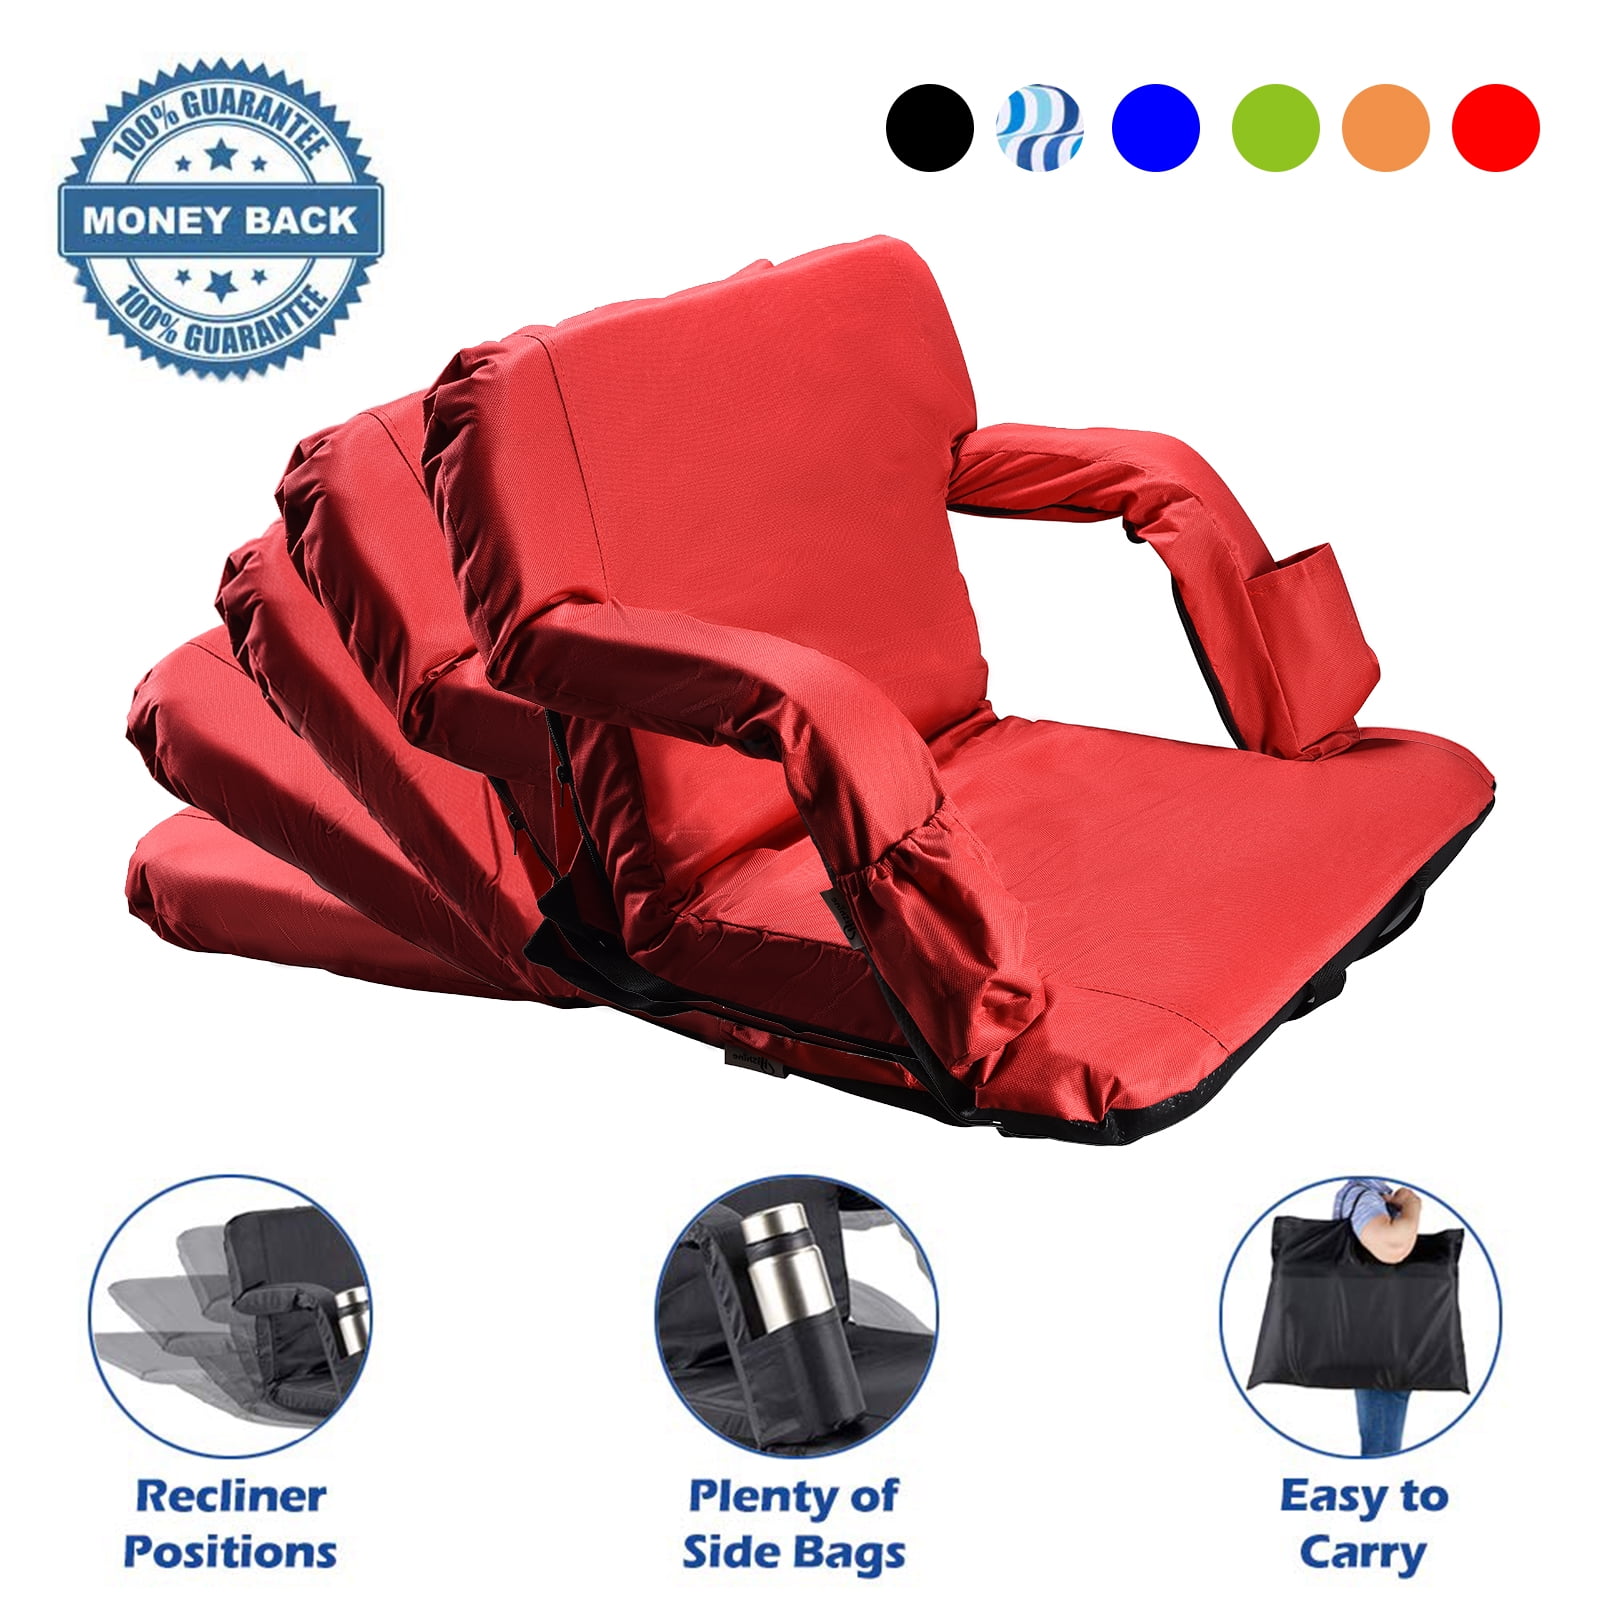 Stadium Seats For Bleachers With Backs Cushion and Arms Folding Wide XL Support 